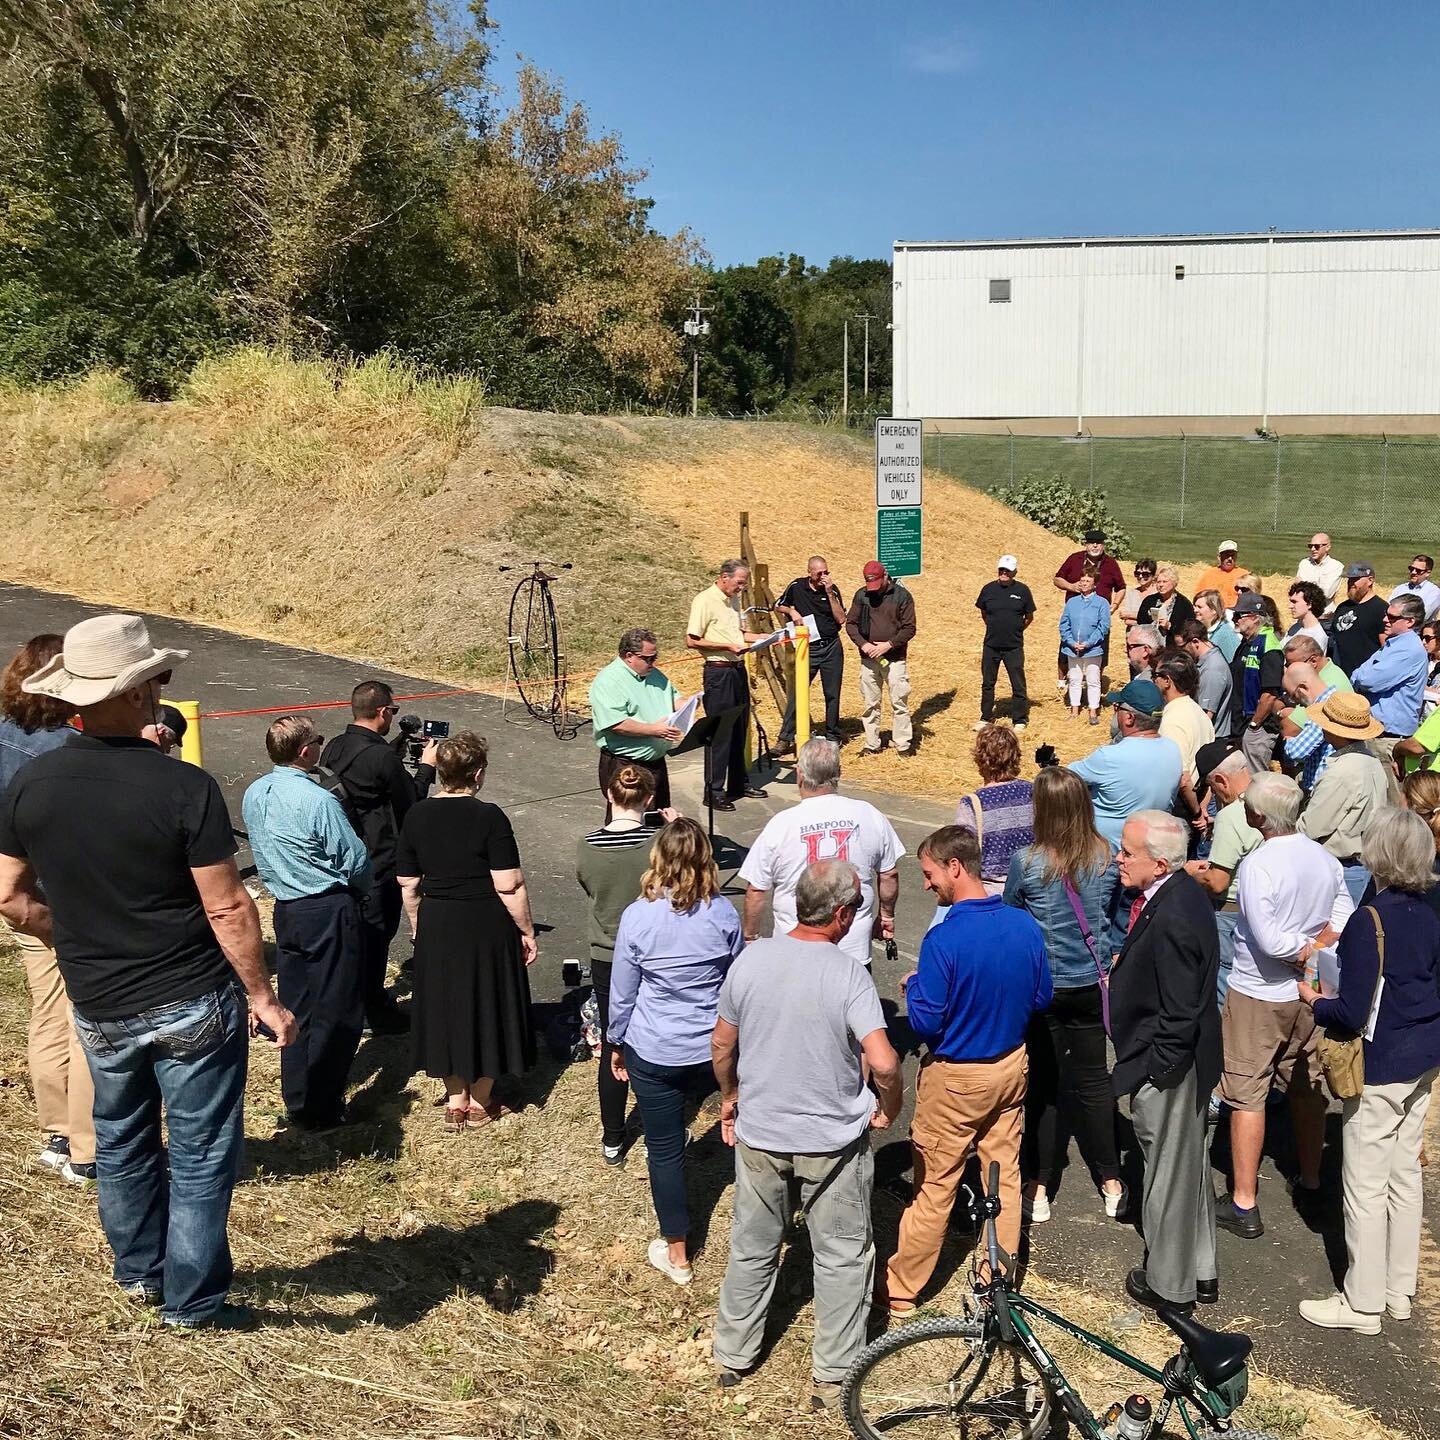 Reinvigorate. A one word description of this past week. Joining partners, users, and dreamers made this past week remind of us why we do what we do. Lebanon County, LVRT, Grantors, and local partners joined together to open 2 new sections of trail fo